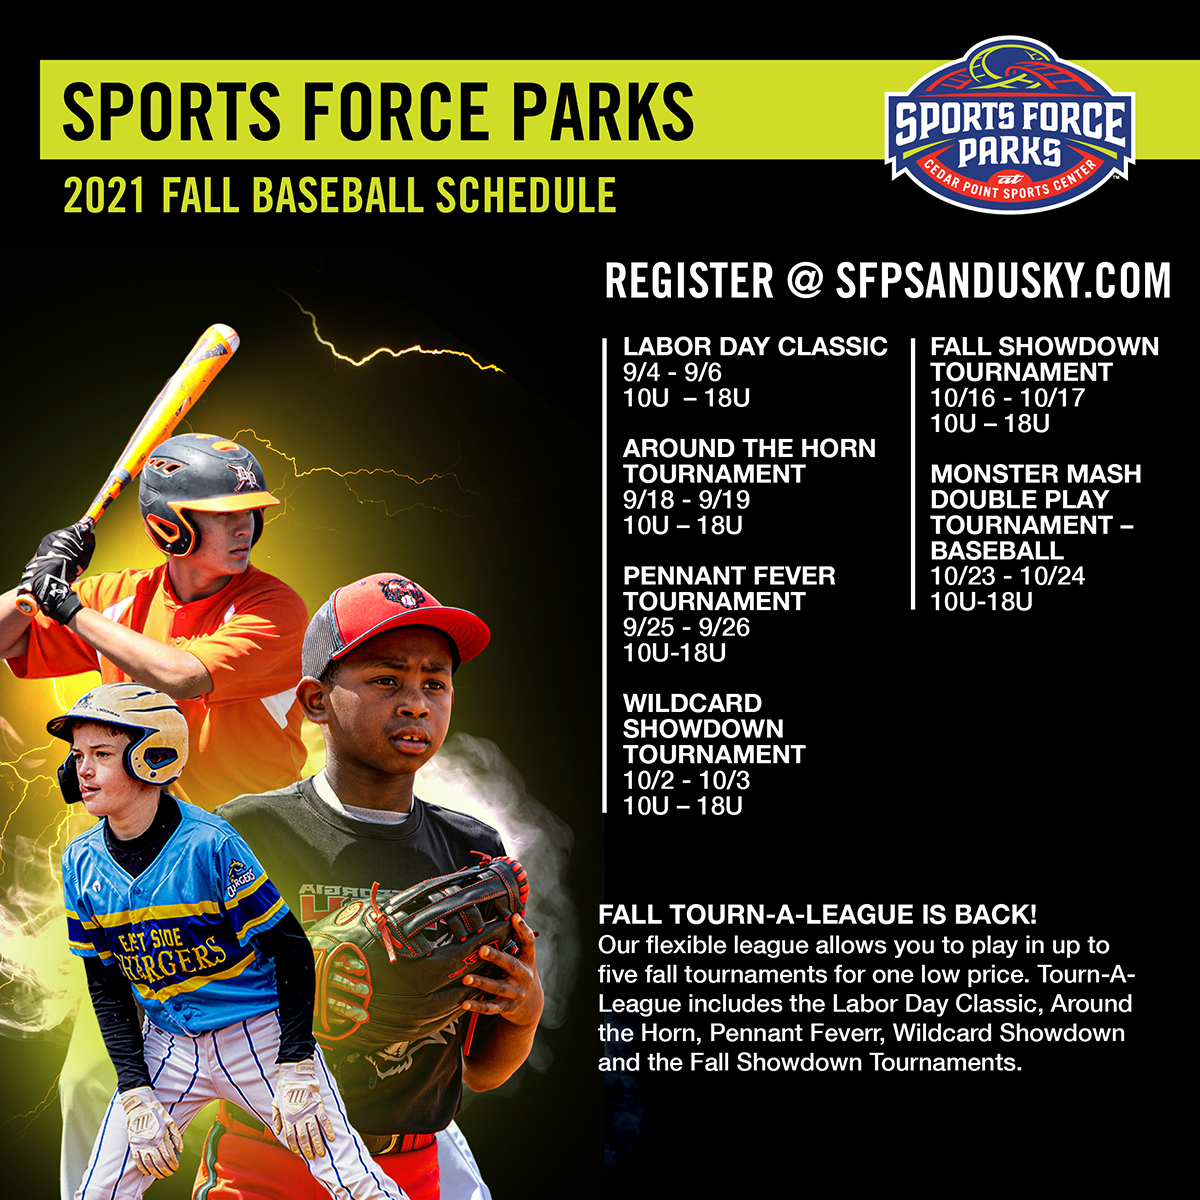 ‼️ Registration for our fall baseball ⚾ season is open! Tourn-A-League is back! Play in up to 5 tournaments for one price! #SFPSports #17Baseball #Play17 ✍️ Sign up today! bit.ly/SFPSBBaseball